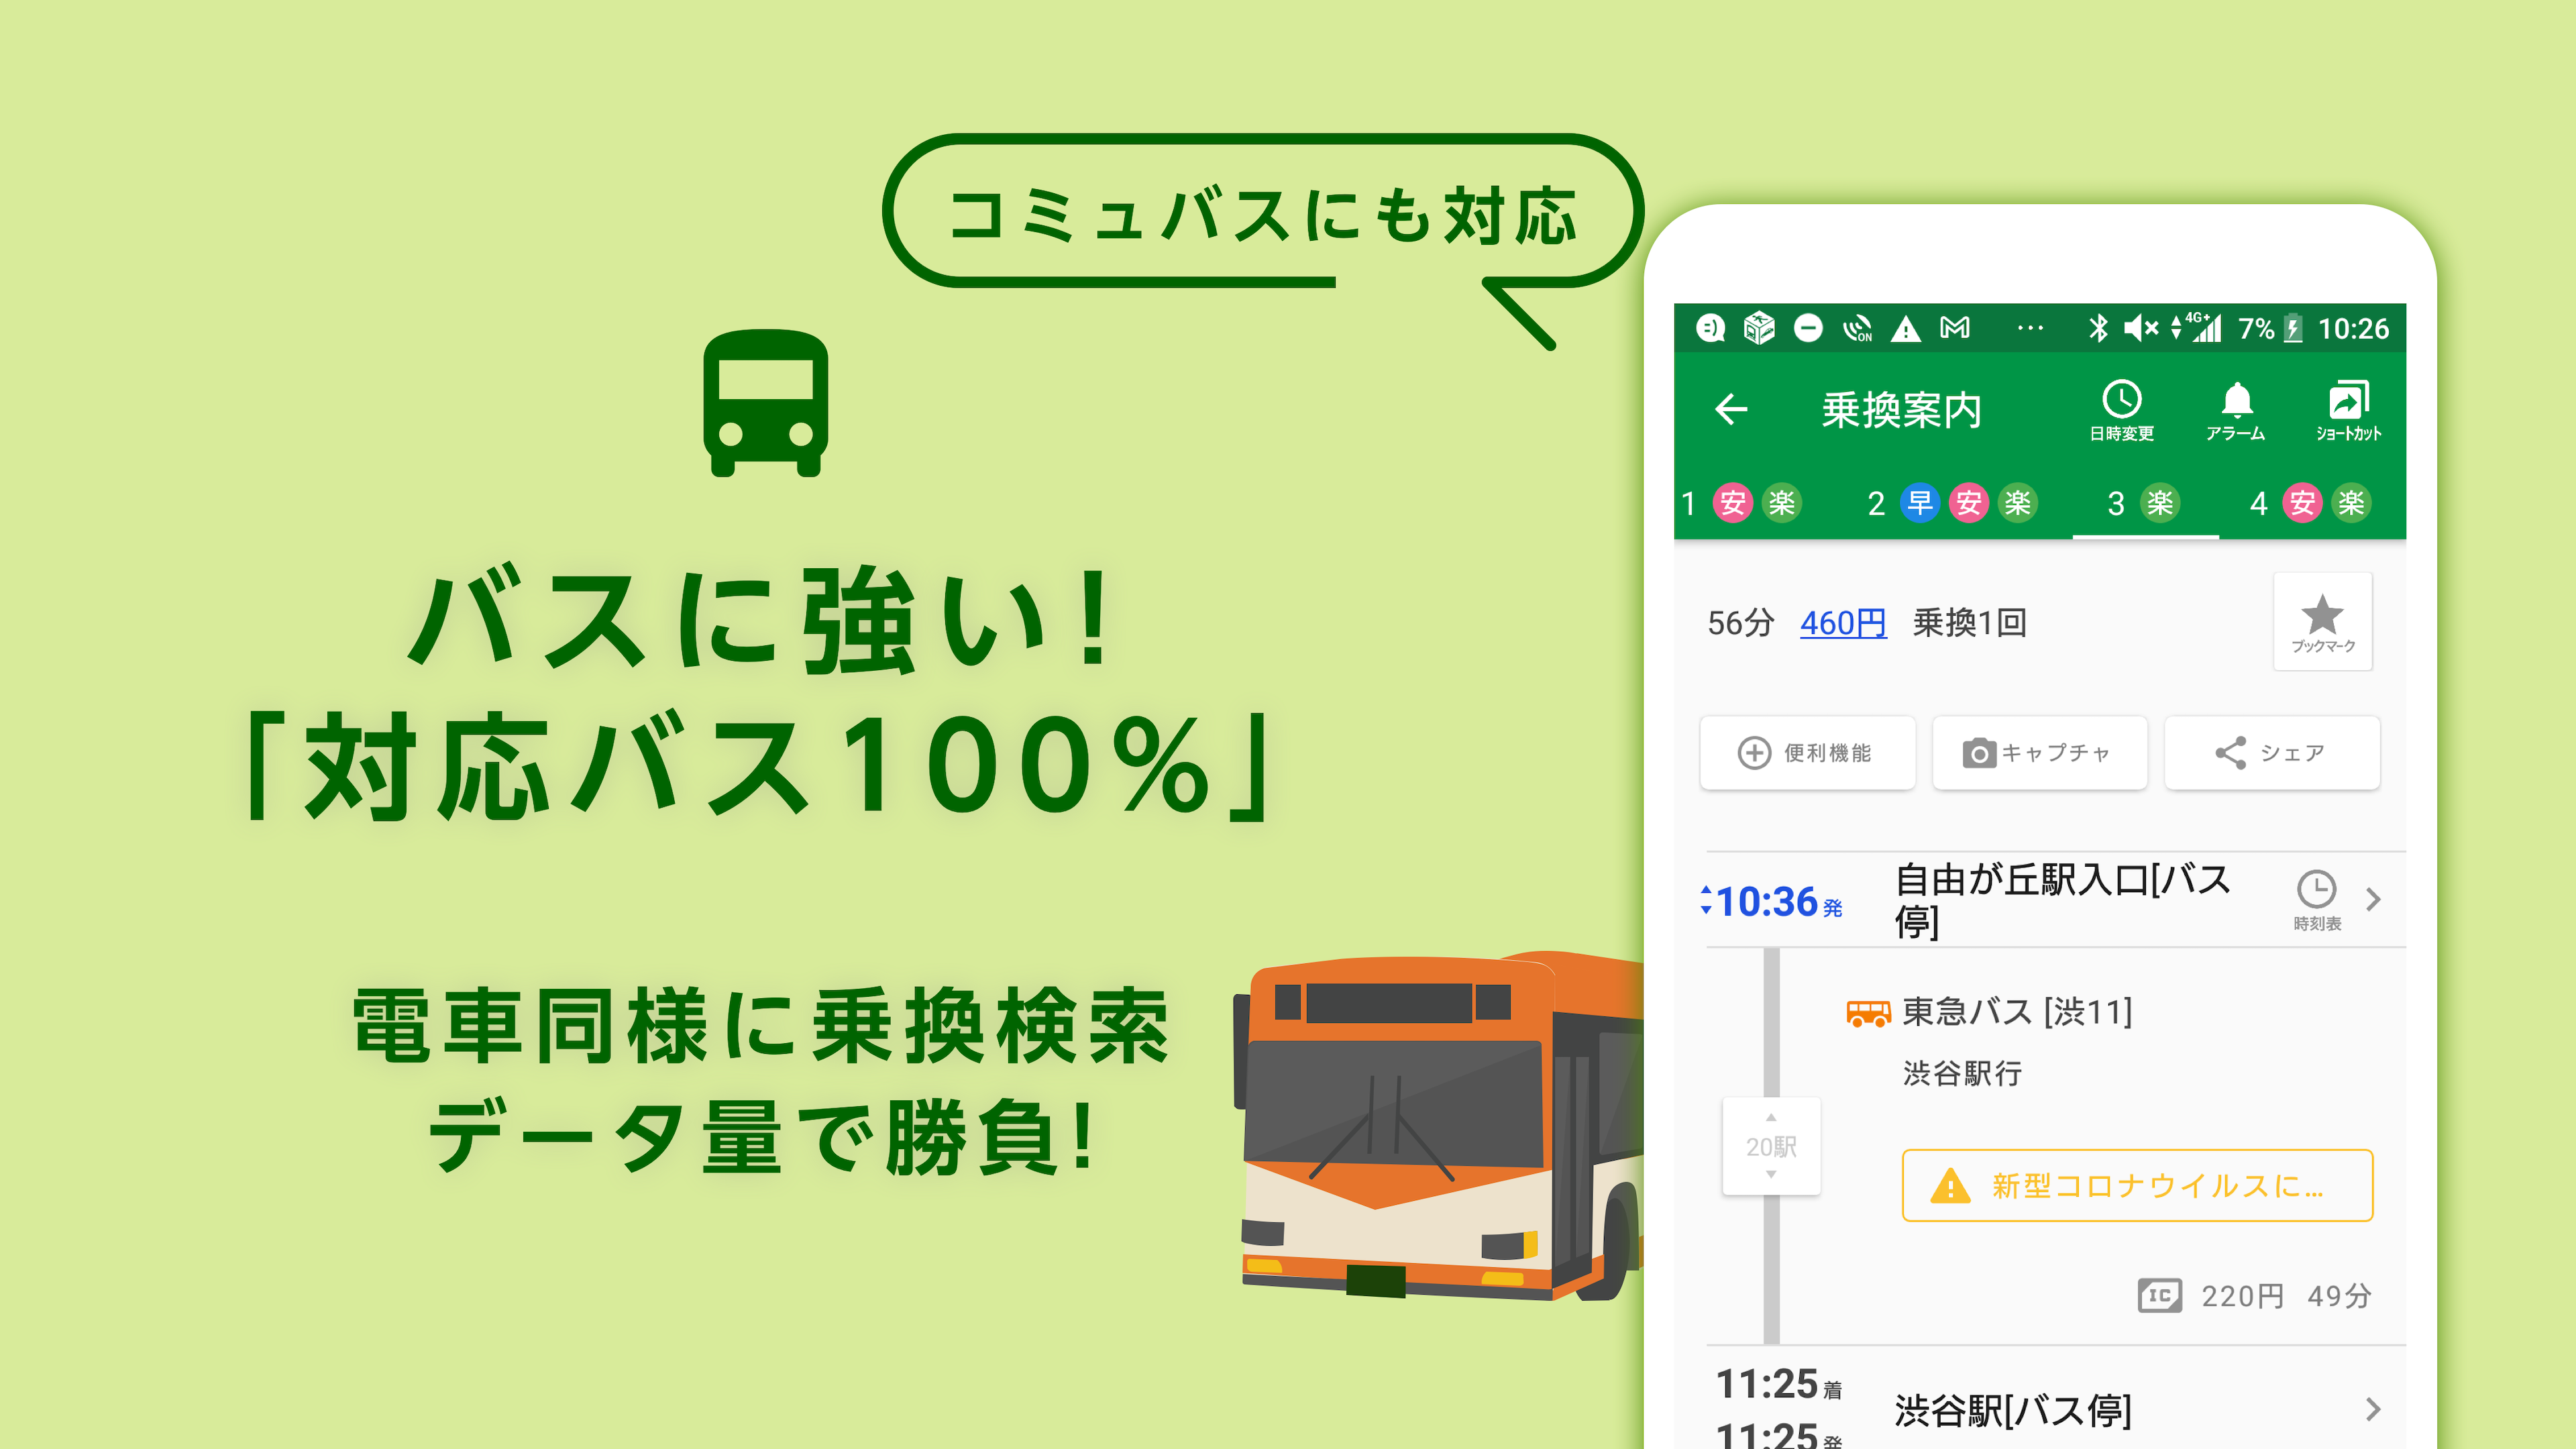 Android application 乗換NAVITIME　Timetable & Route Search in Japan Tokyo screenshort